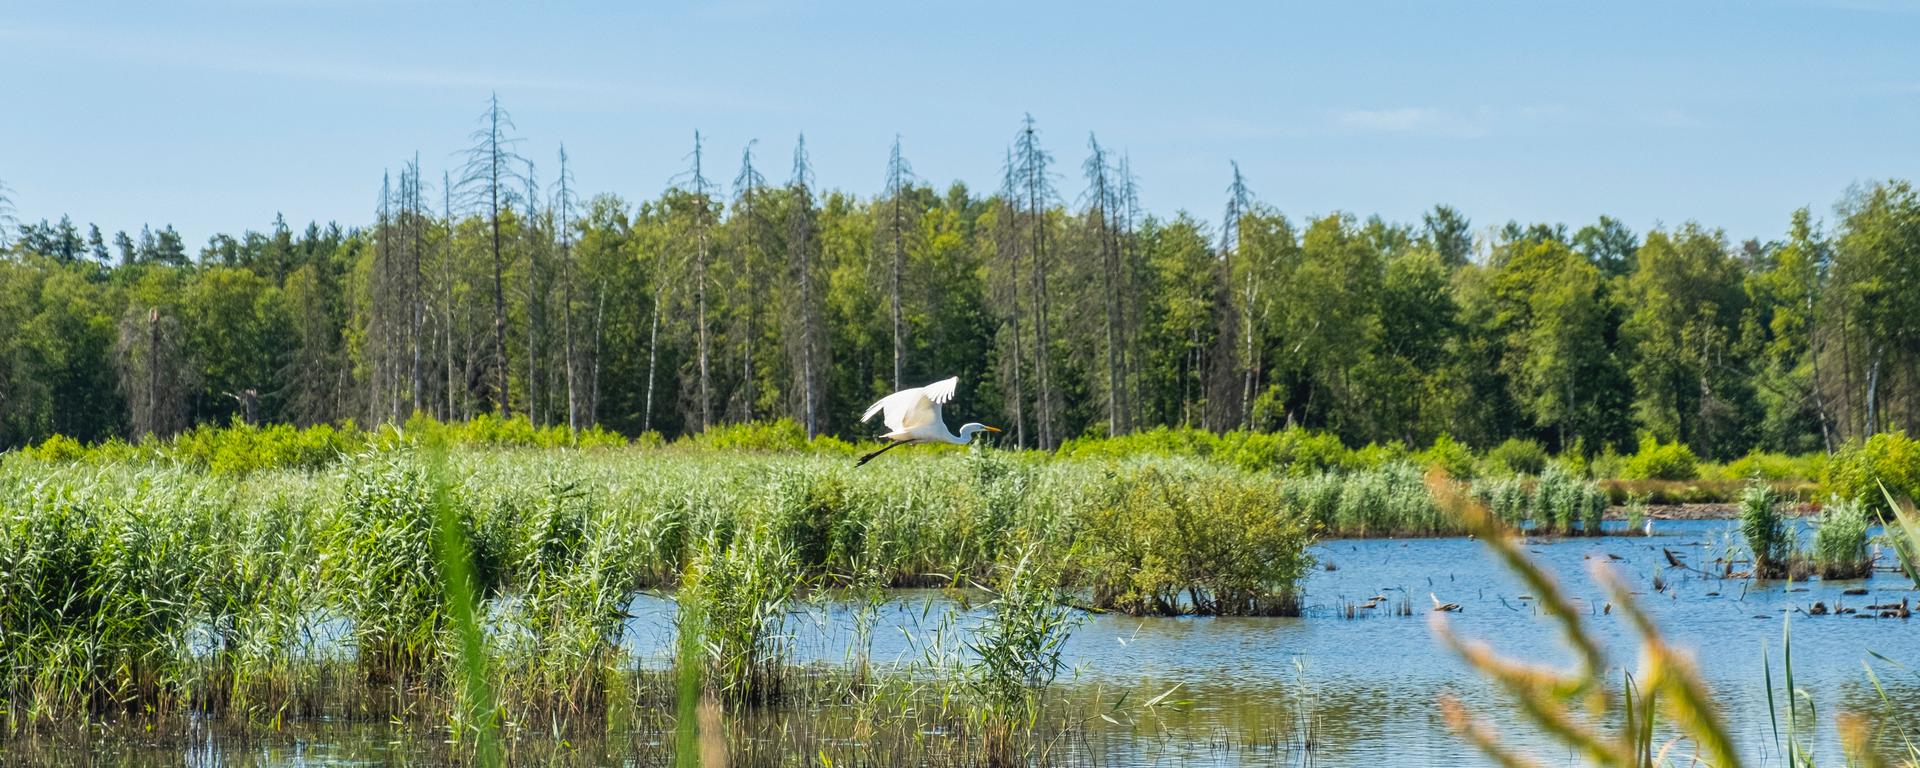 A large white bird flies over a wetland on a sunny day